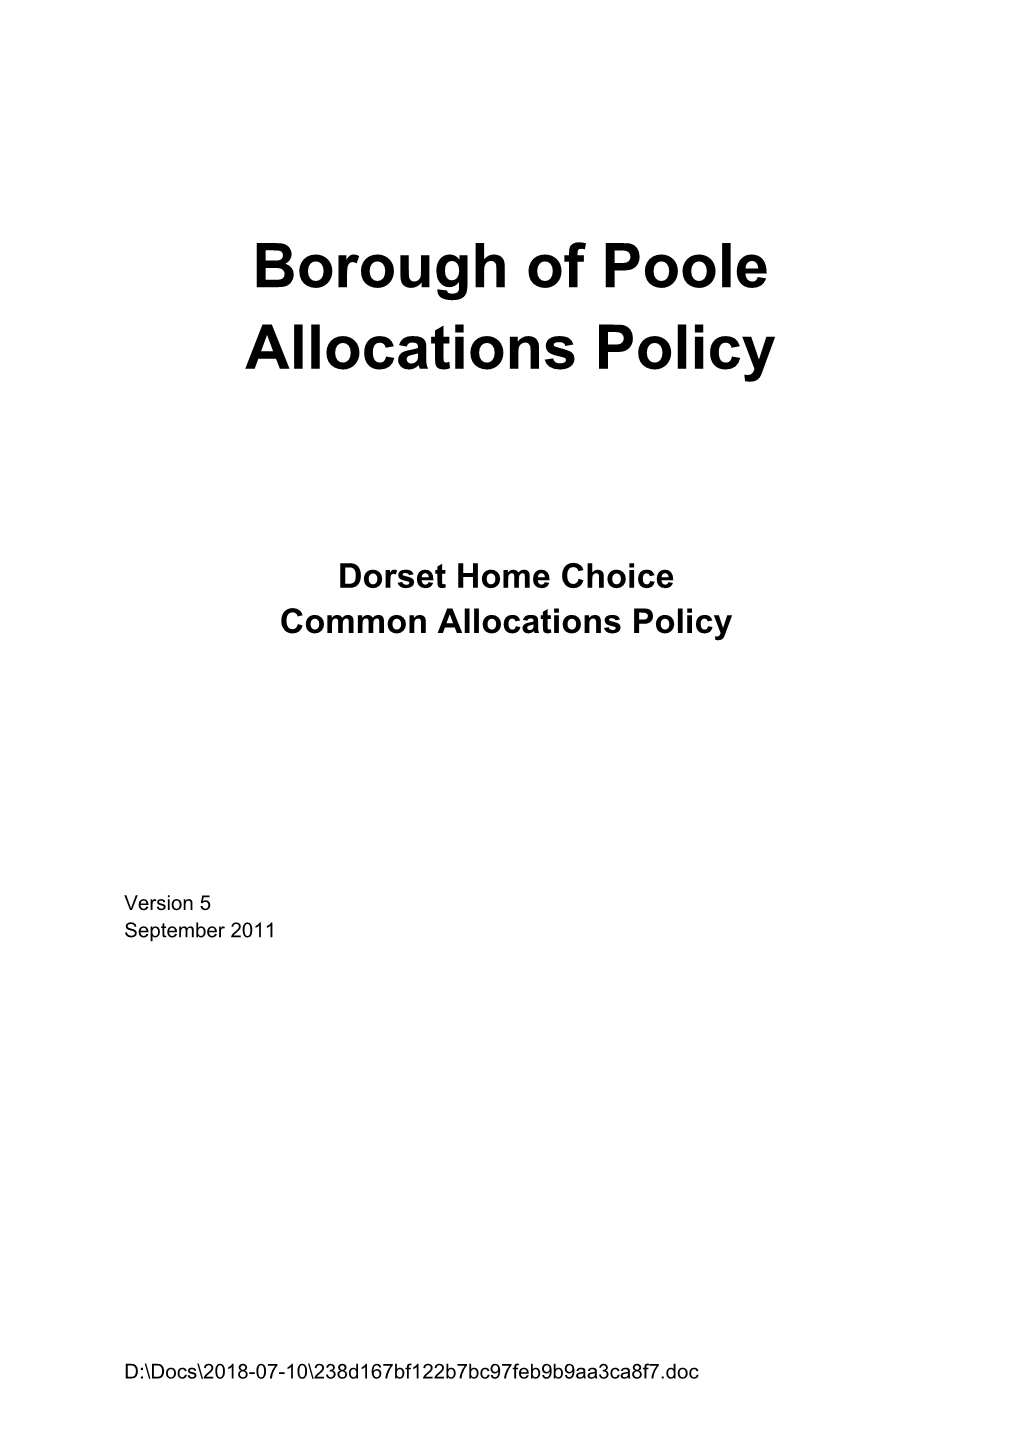 Borough of Poole Allocations Policy - Choice Based Lettings - Appendix 1